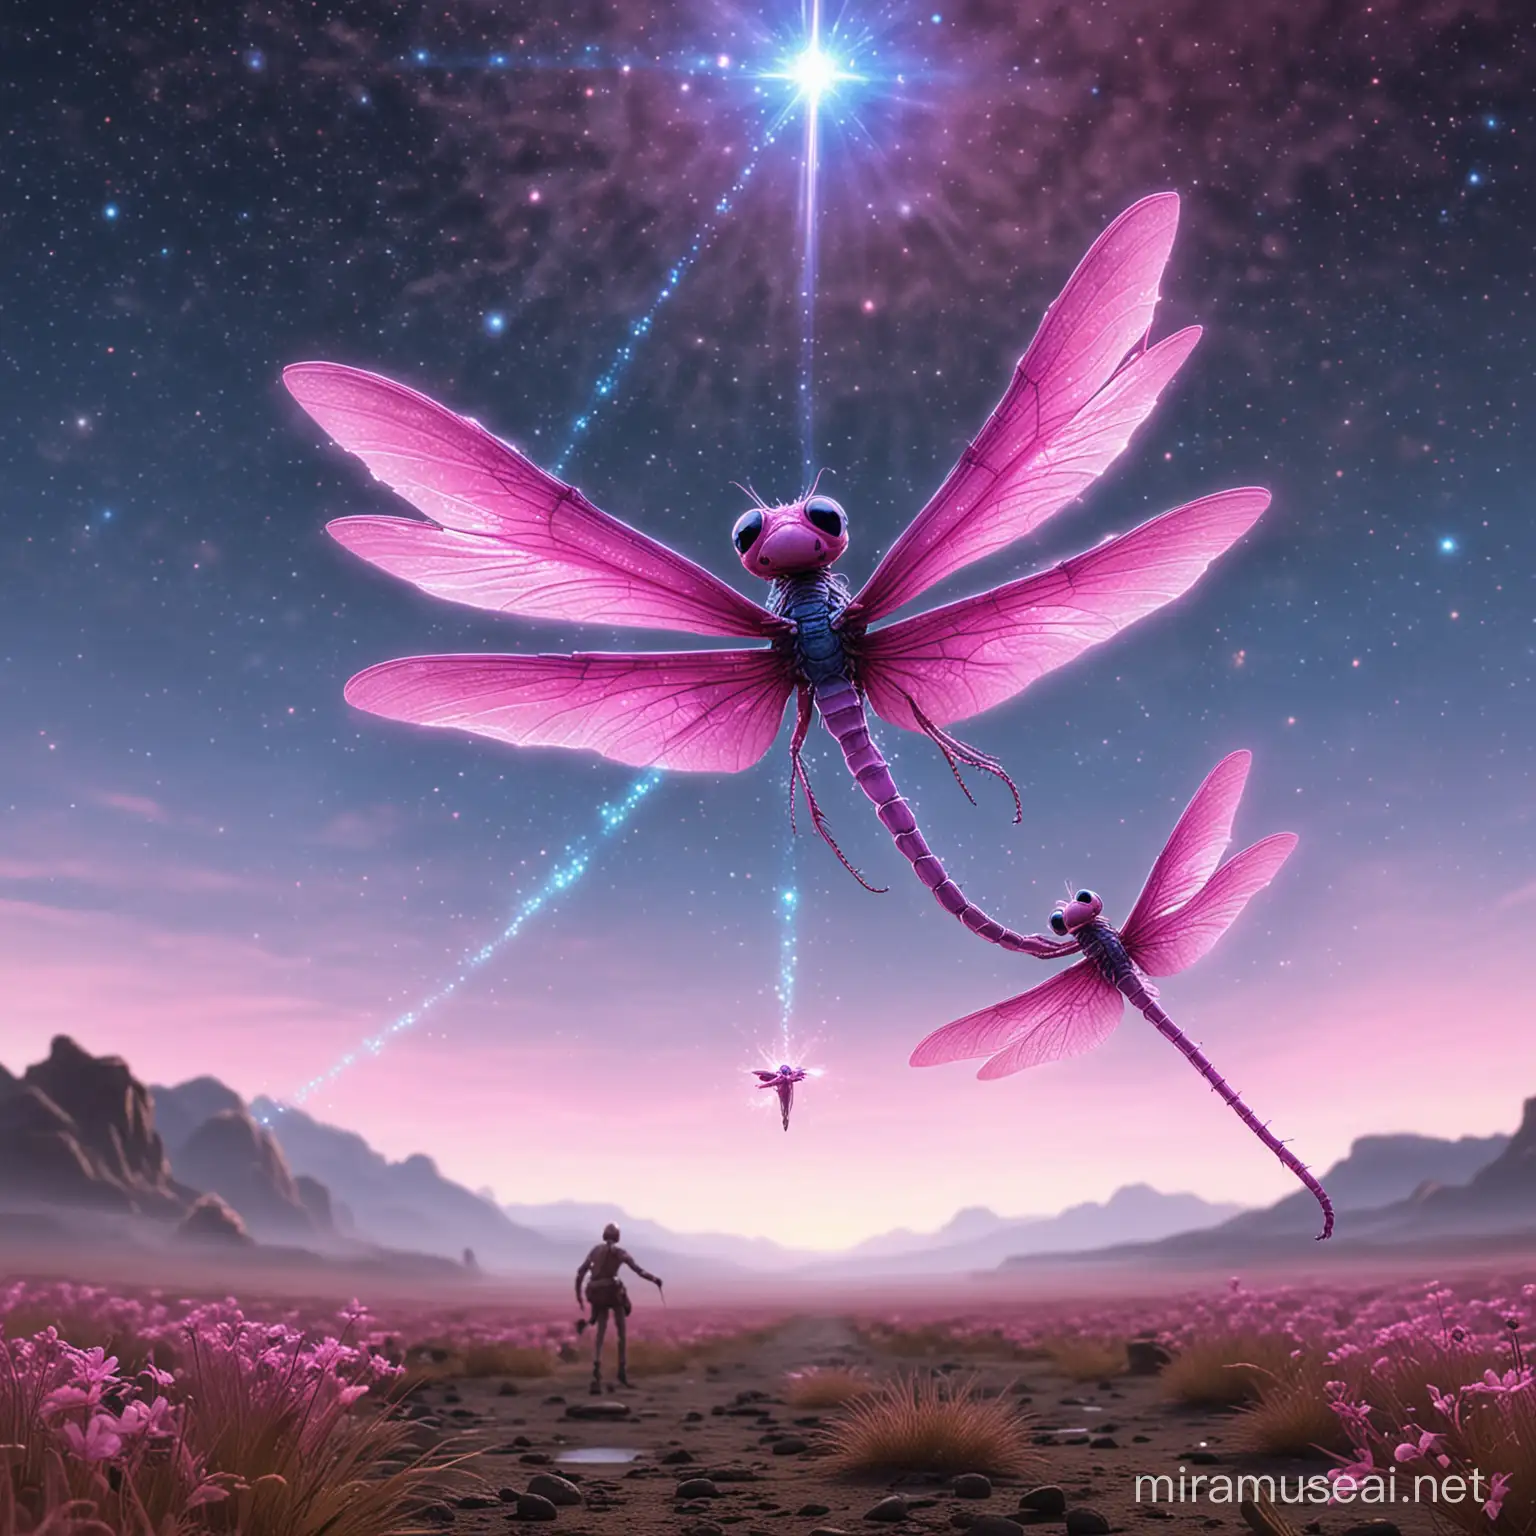 pink Alien dragon fly that has blue stars shooting behind it with a personal in the distance trying to catch up to it
